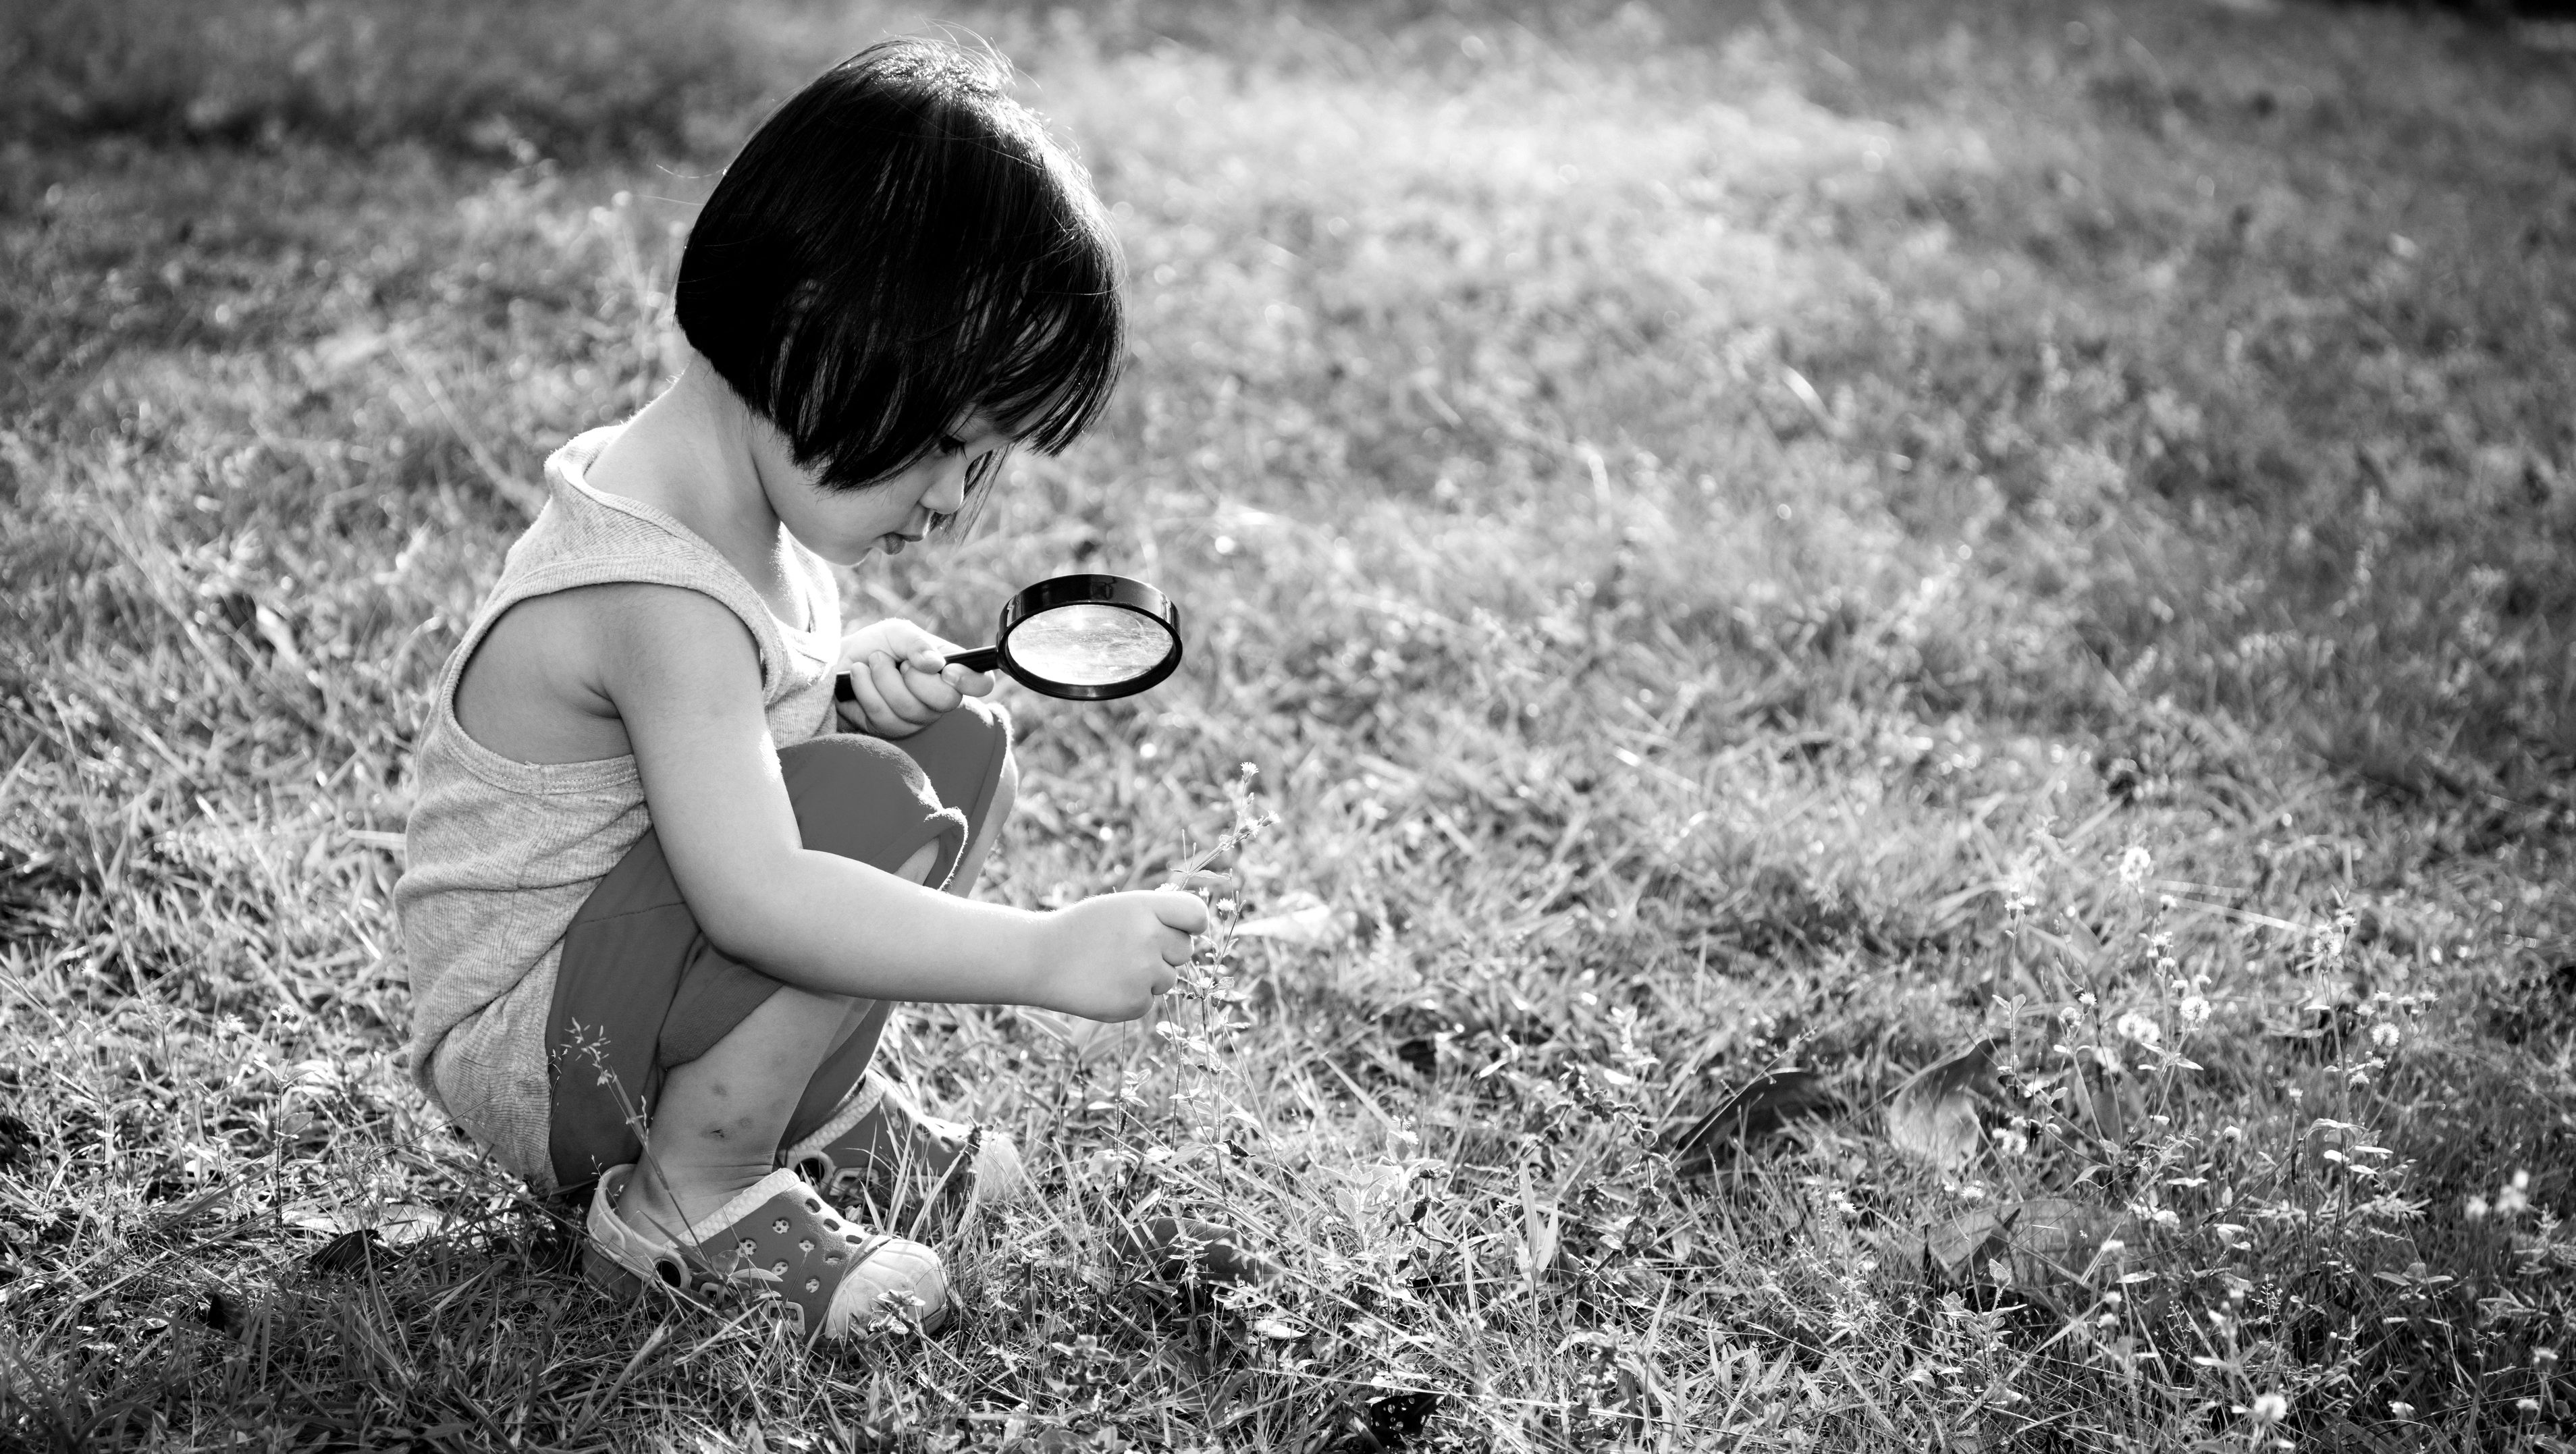 Curiosity: How Acting Like a 5-Year Old Can Make You a Better Leader